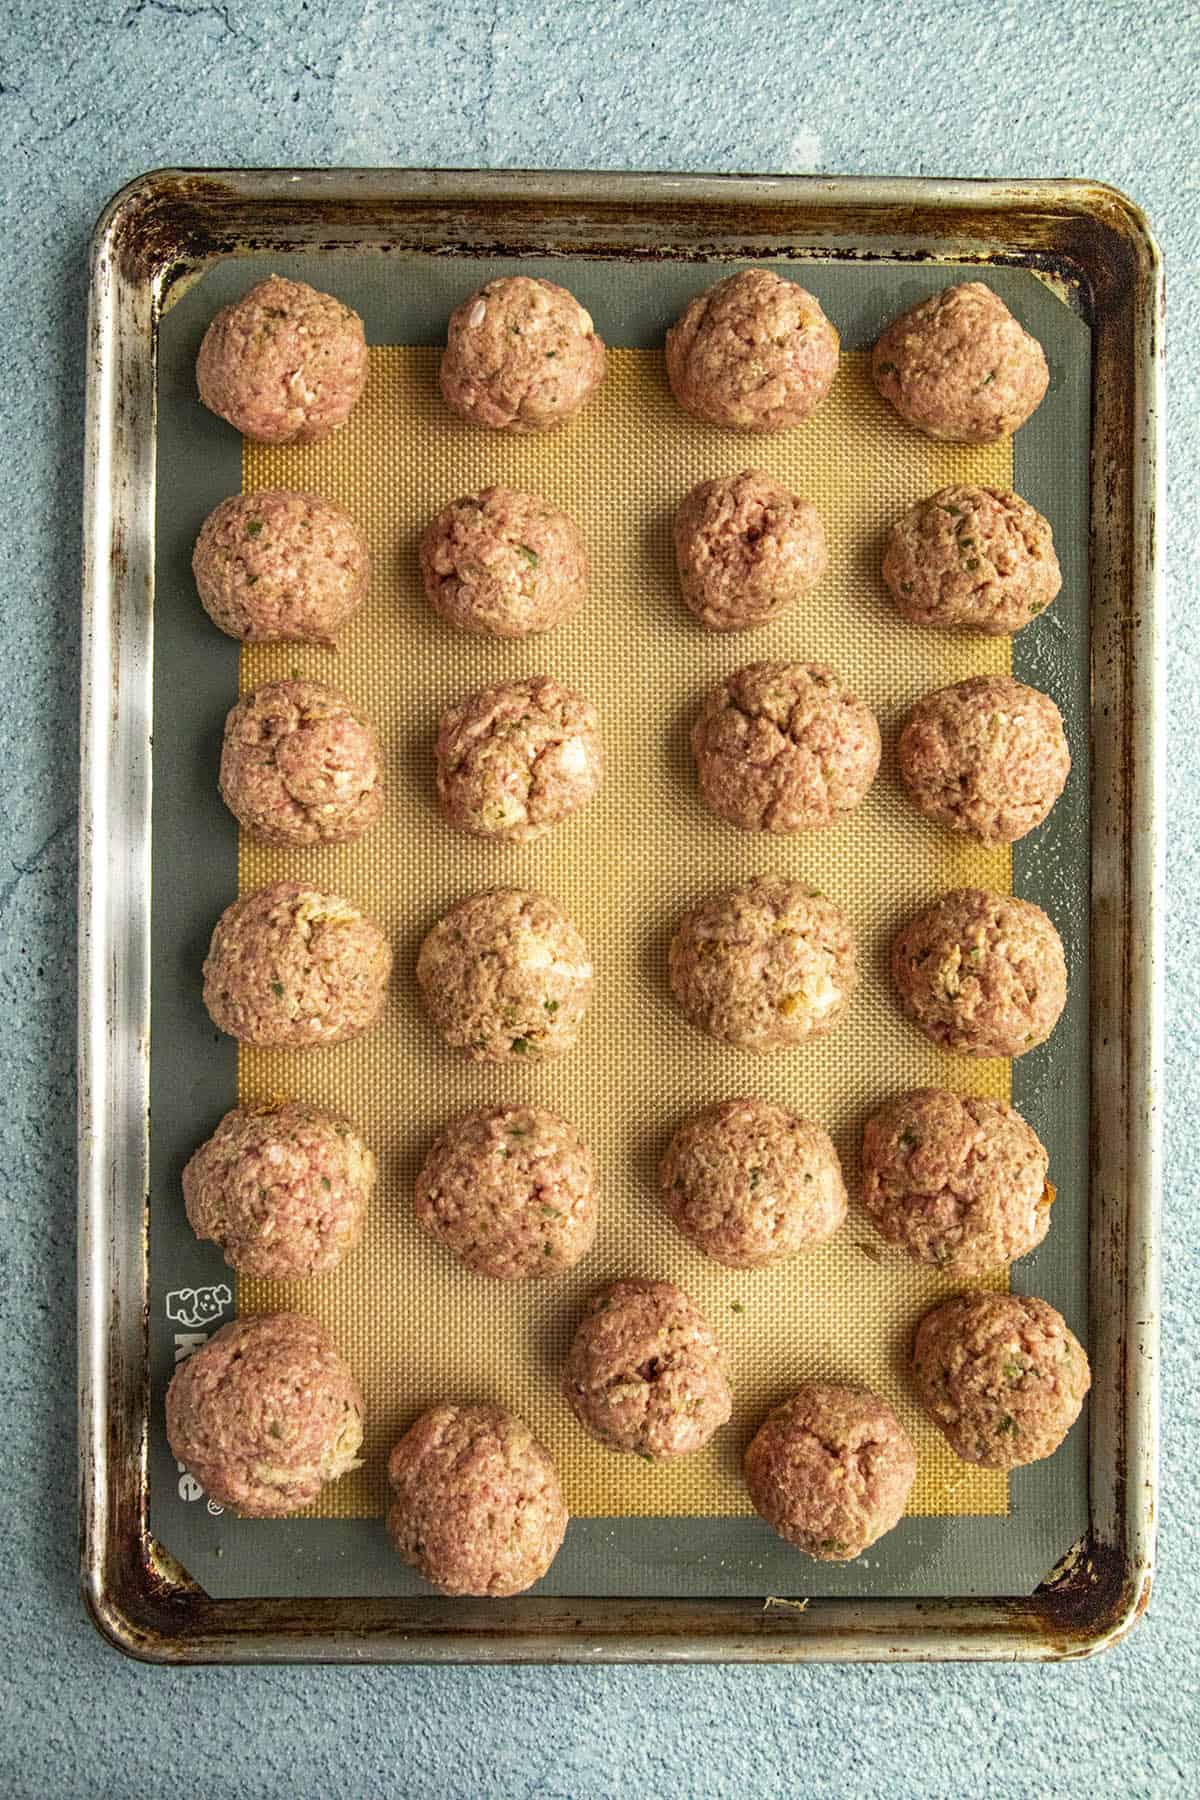 Meatballs on a baking sheet, ready for the oven